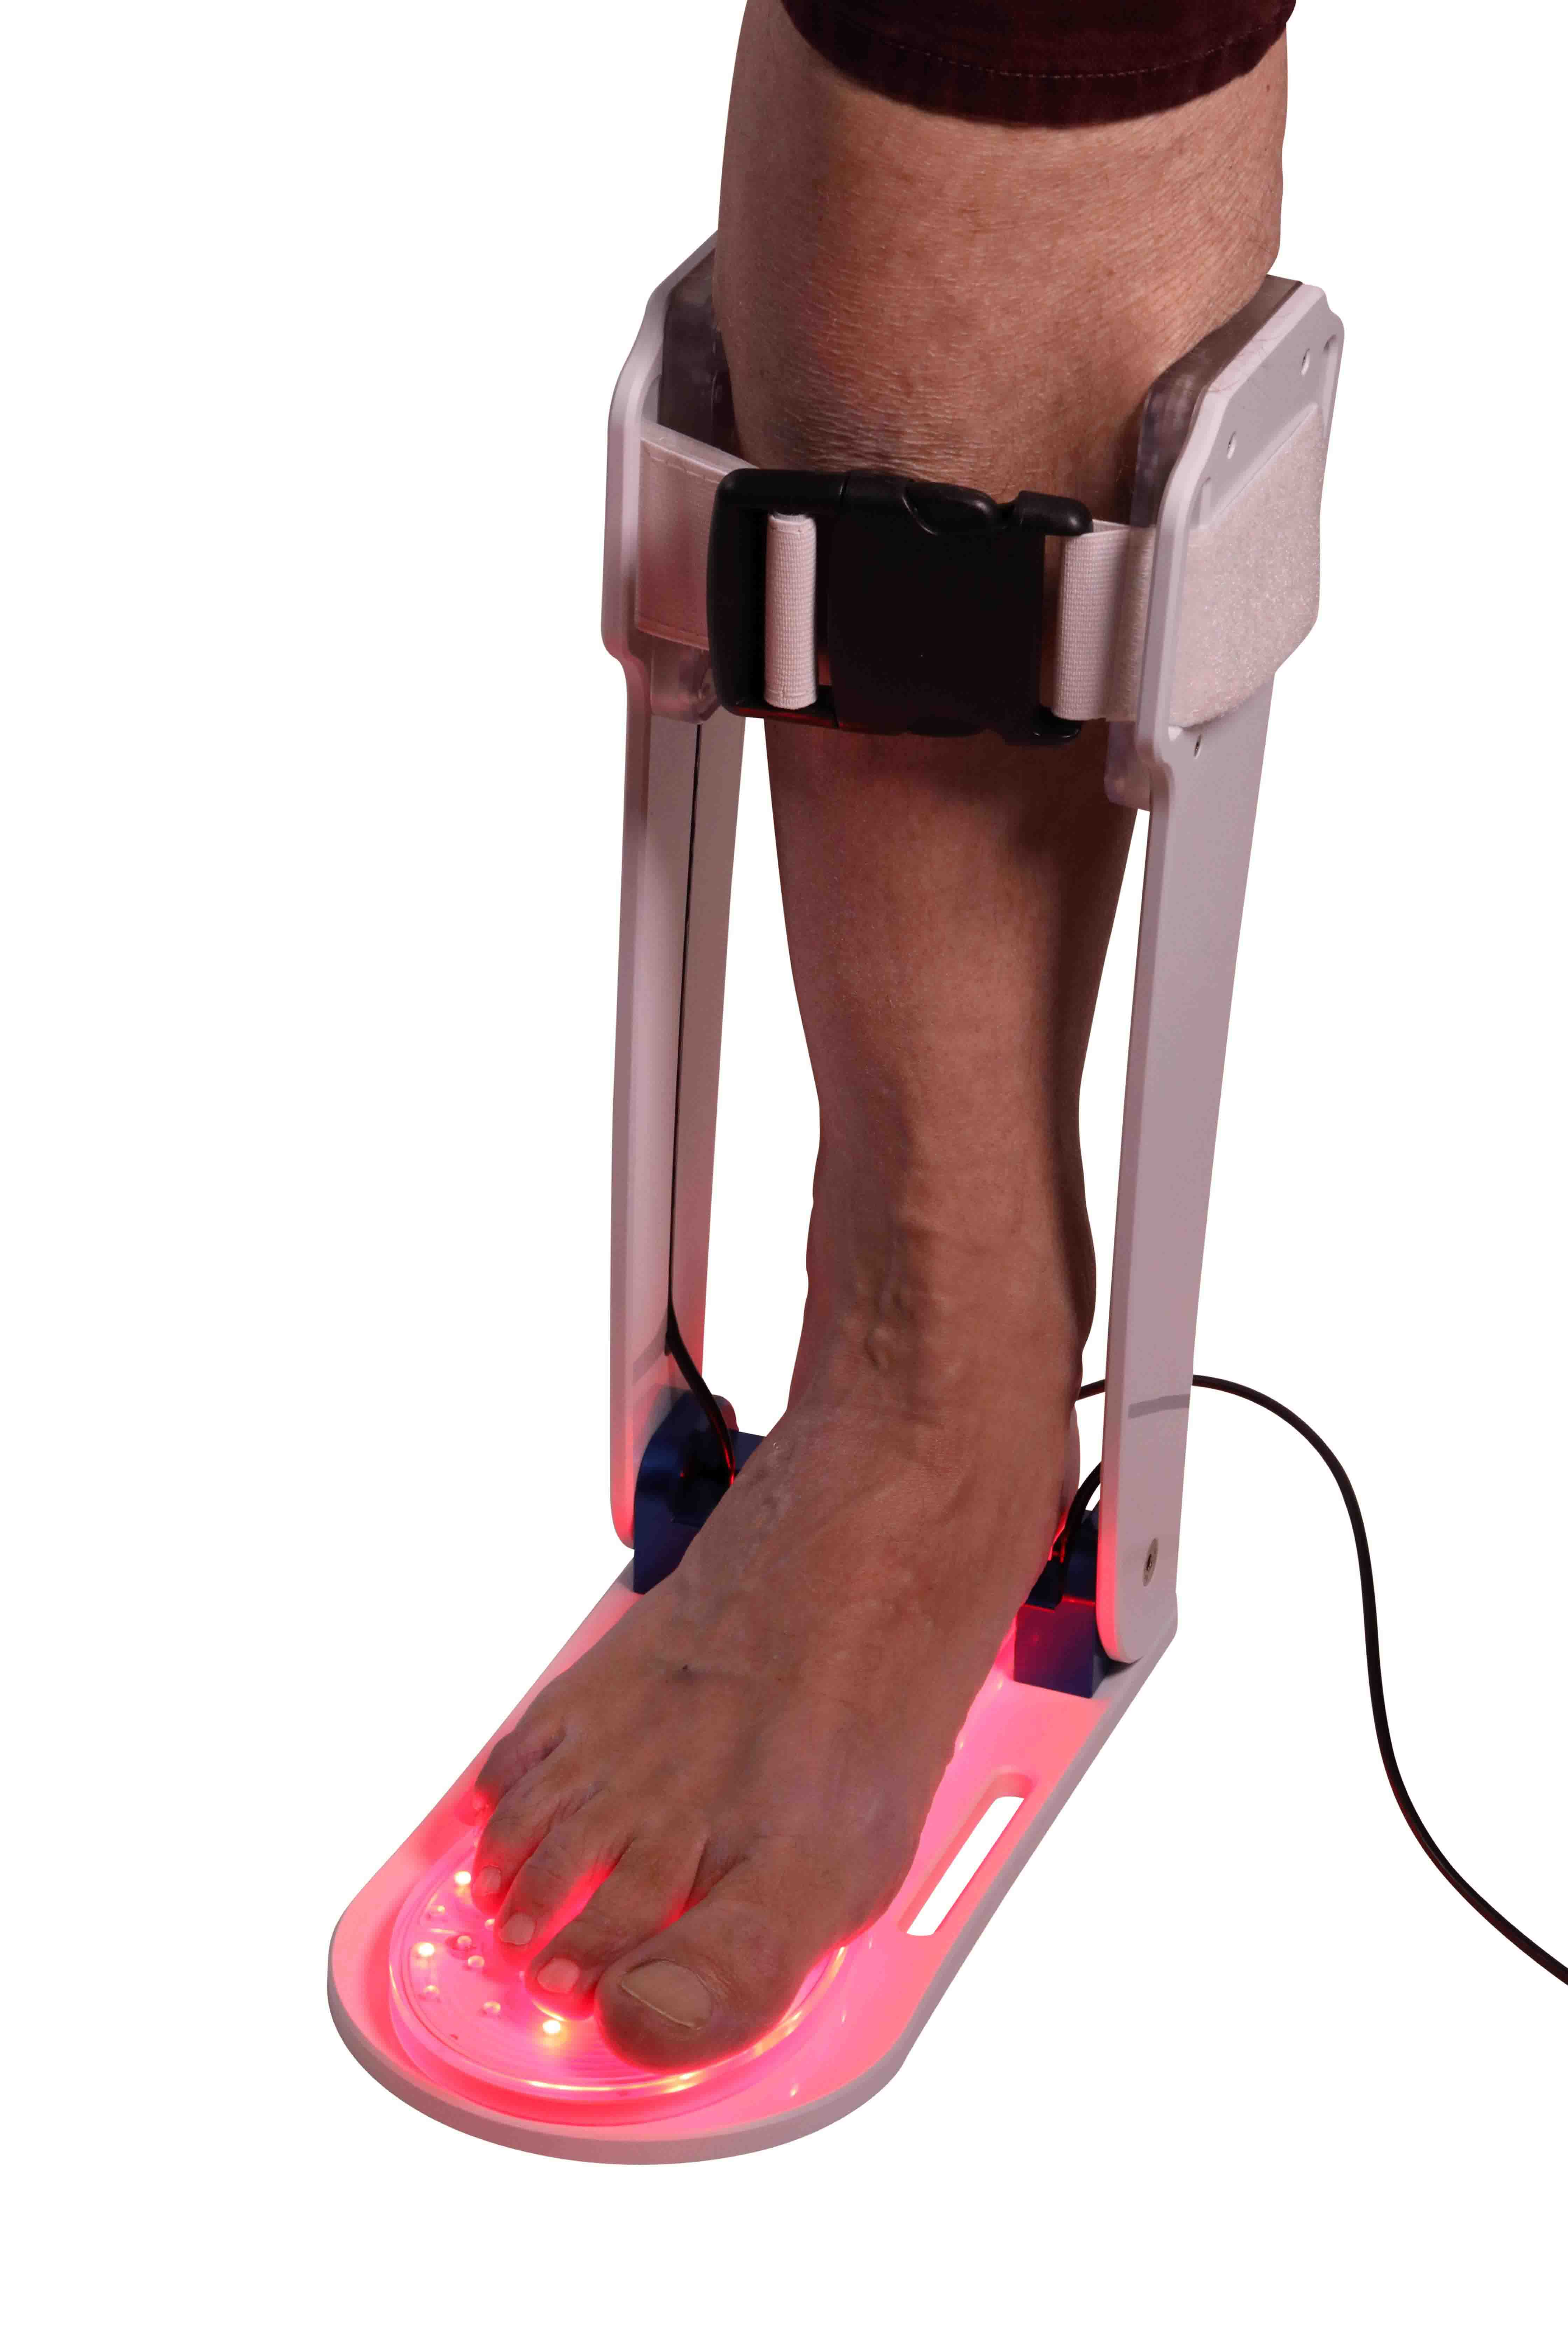 VASCULAR INFRARED LIGHT THERAPY - Innovative Therapy Canada.